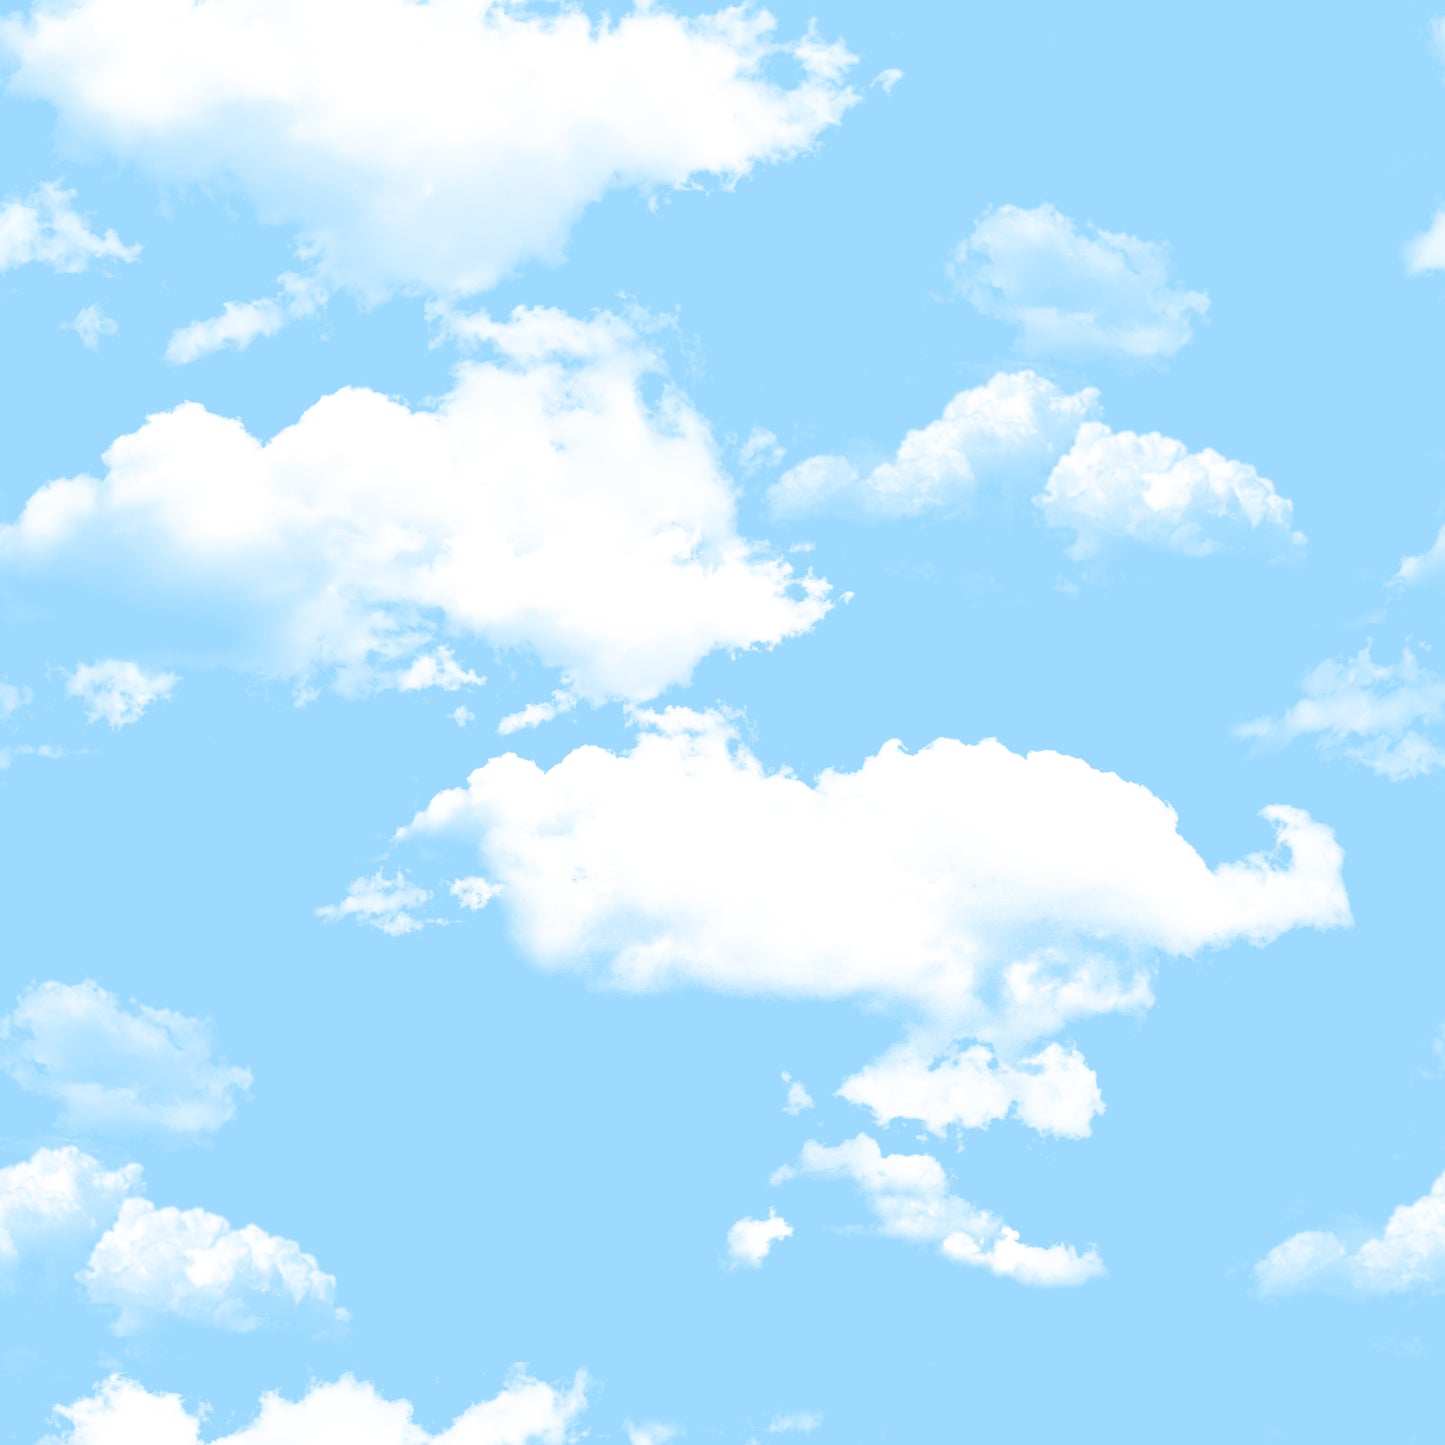 Summer Skies - Blue Sky and Clouds 011